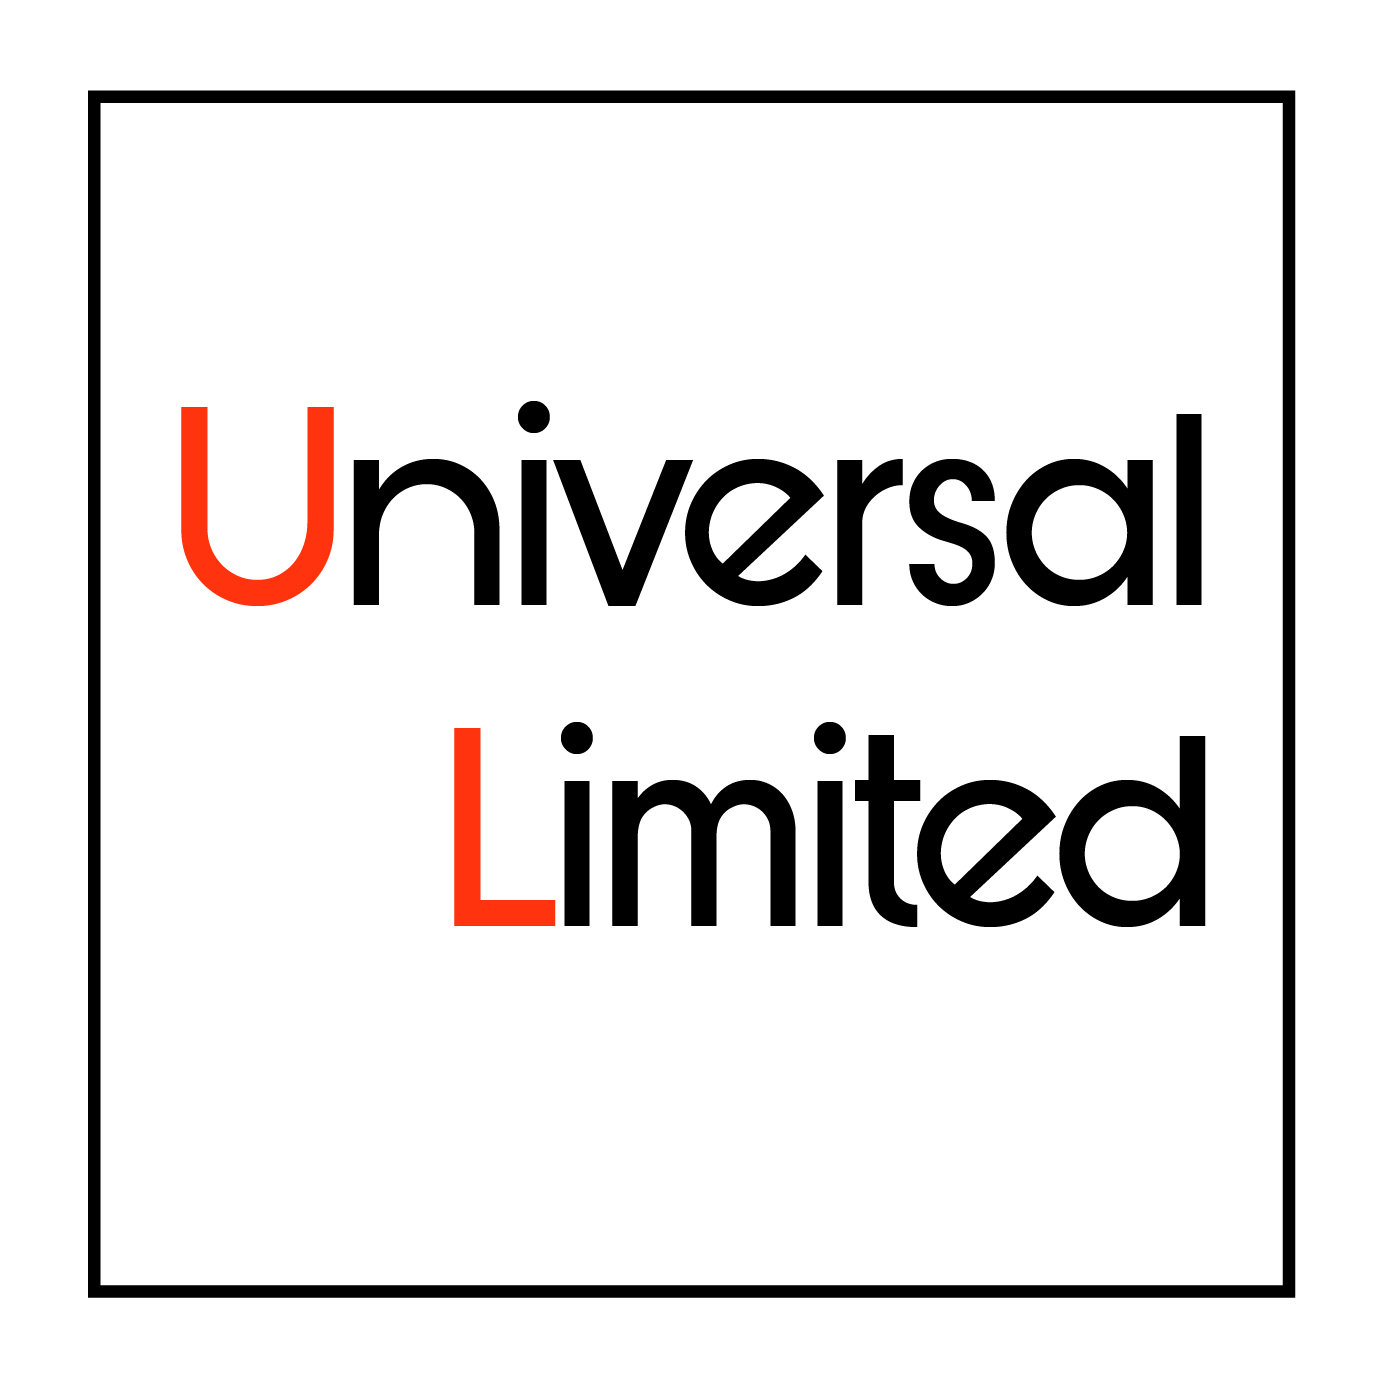 Universal Limited